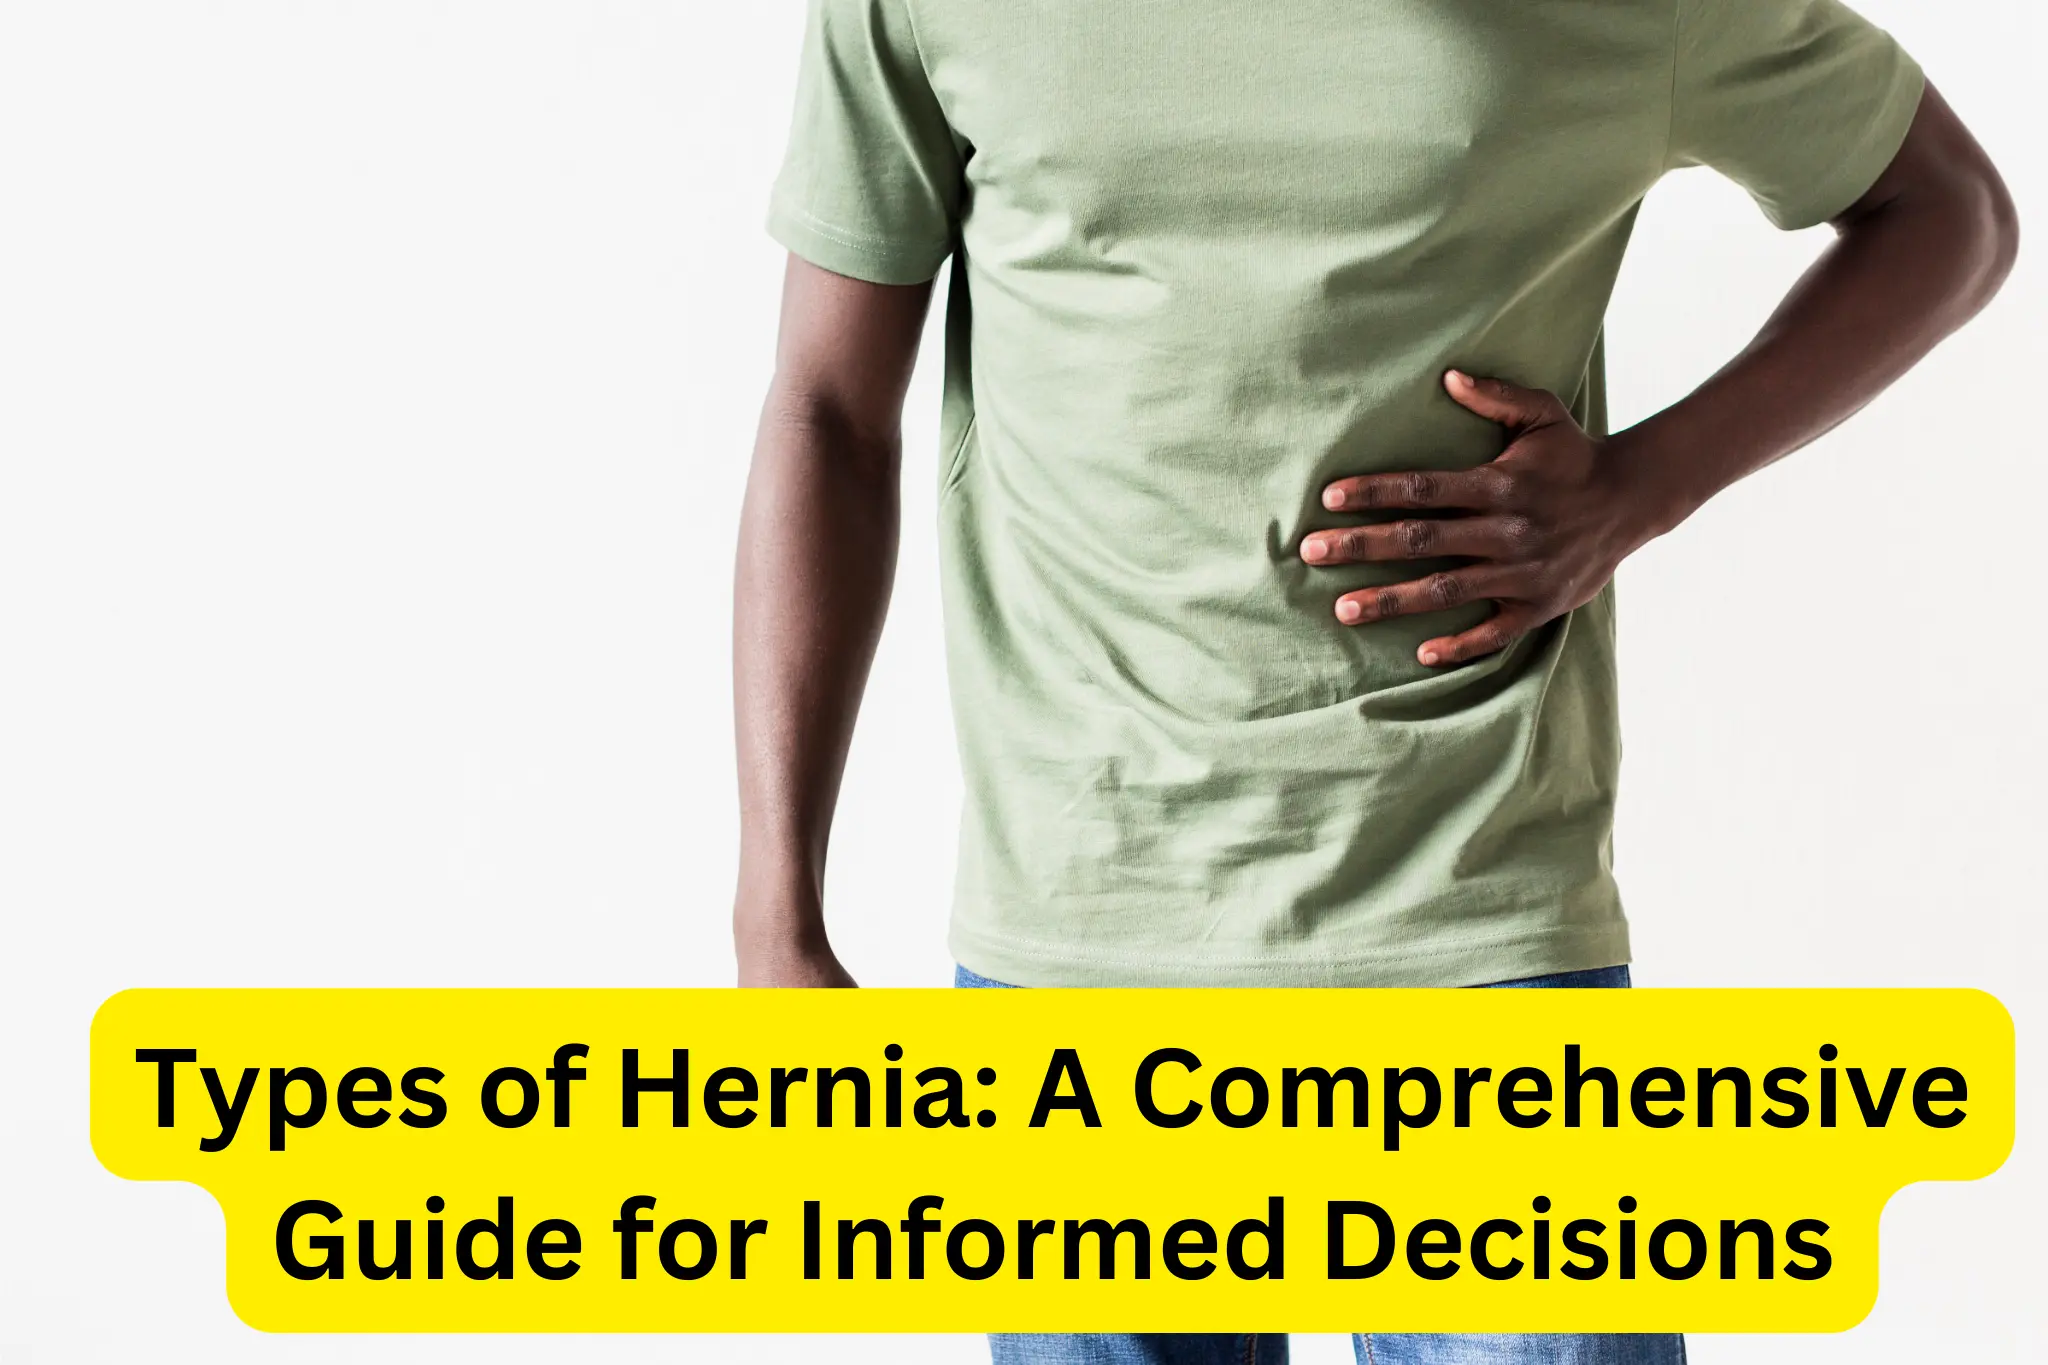 Types of Hernia: A Comprehensive Guide for Informed Decisions